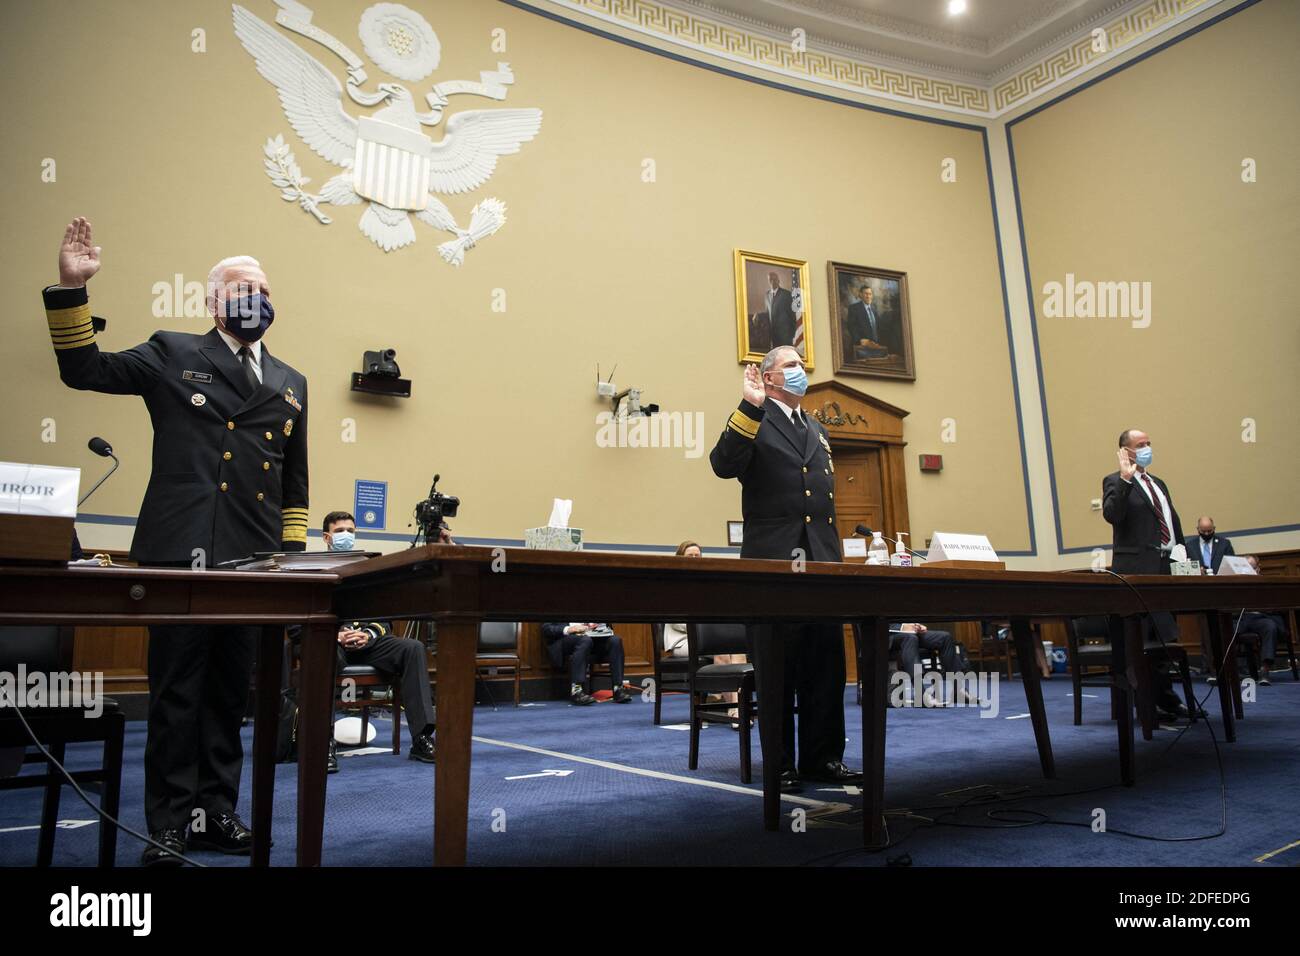 UNITED STATES - JULY 2: Admiral Brett P. Giroir, M.D., Assistant Secretary for Health, left, Rear Adm. John Polowczyk, leader of the Supply Chain Stabilization Task Force and vice director of logistics of the Joint Chiefs of Staff, and Kevin Fahey, assistant Defense secretary for acquisition, swear in before testifying during a House Oversight and Reform Committee hearing on âÂ€ÂœThe Administration's Efforts to Procure, Stockpile, and Distribute Critical SuppliesâÂ€Â in the Capitol in Washington on Thursday, July 2, 2020. Photo by Caroline Brehman/Pool/ABACAPRESS.COM Stock Photo